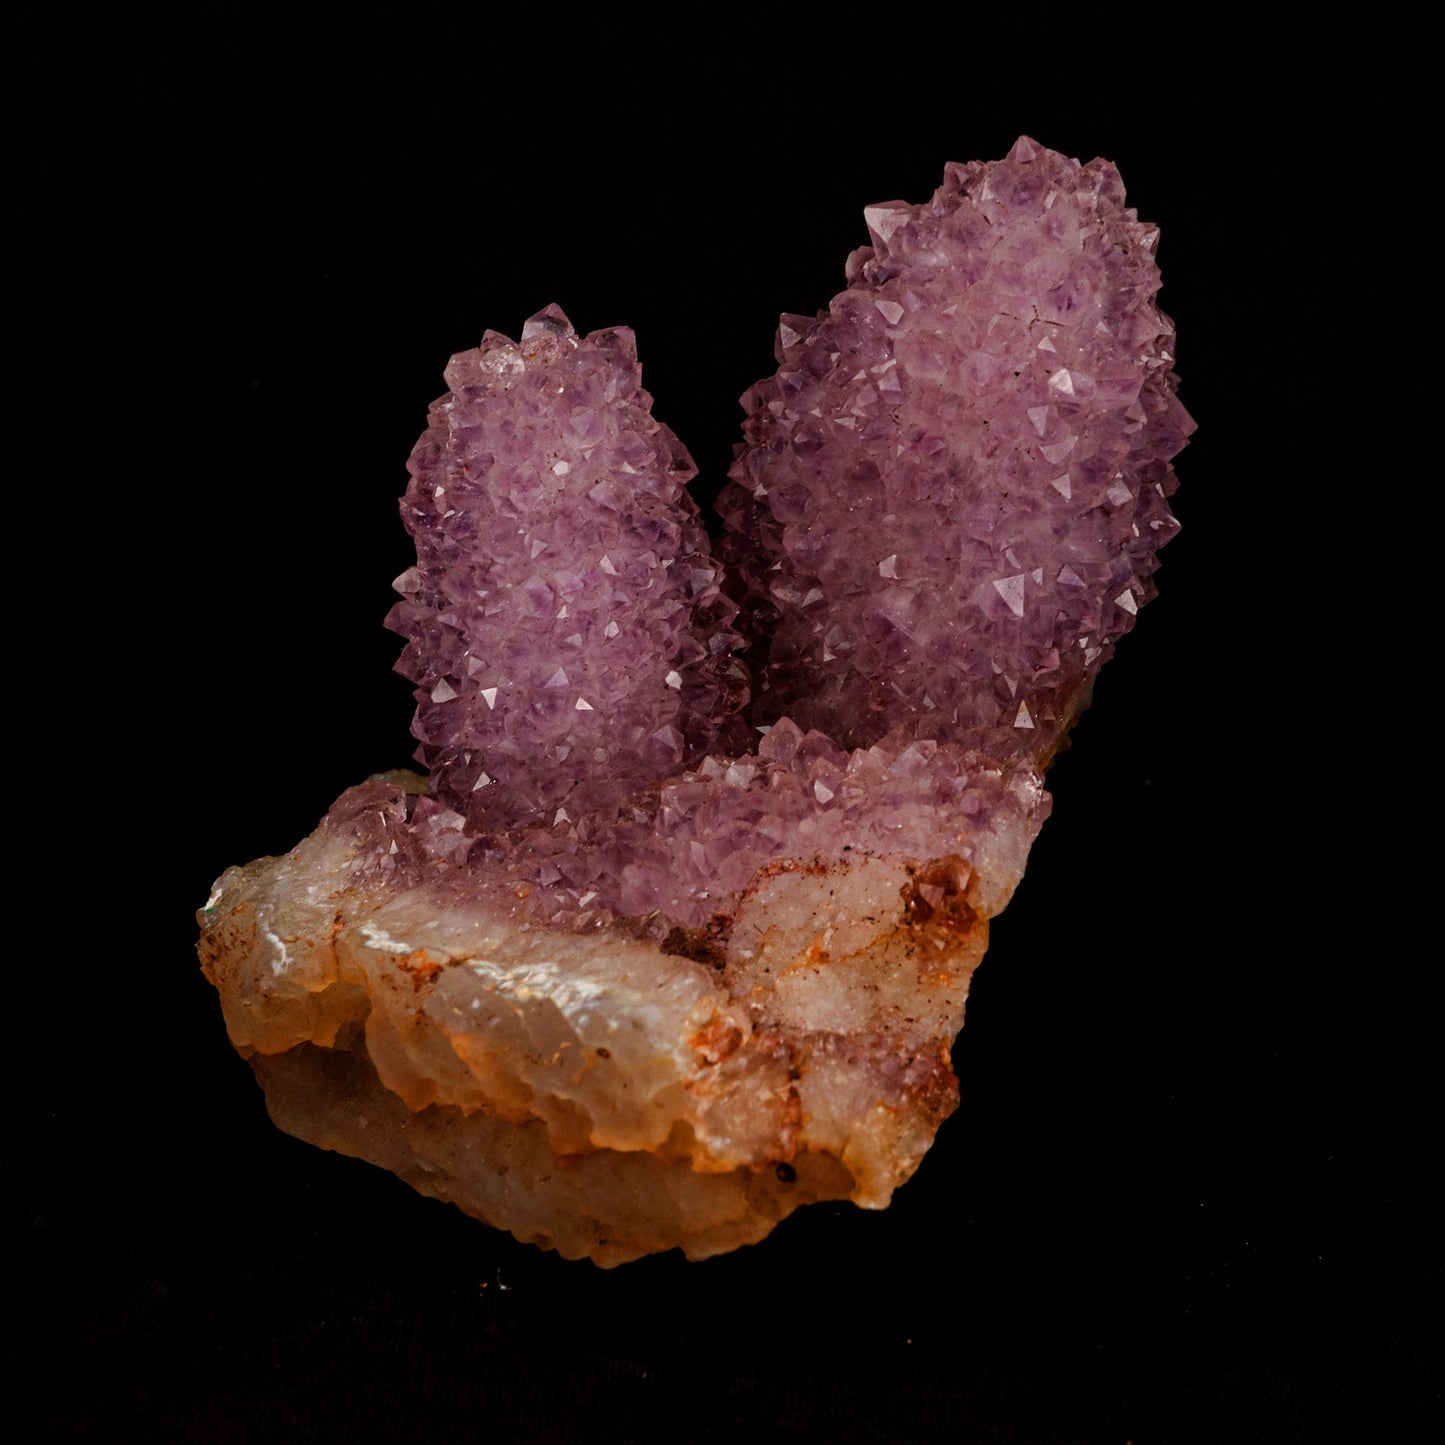 Amethyst Sparkling Twin Cactus Formation Natural Mineral Specimen # B…  https://www.superbminerals.us/products/amethyst-sparkling-twin-cactus-formation-natural-mineral-specimen-b-5293  Features: Beautiful and extremely aesthetic. A plate of amethyst quartz crystals with overgrowths of smaller amethyst crystals, all with unaltered terminations. The crystals of these Amethysts are transparent to translucent and have a vitreous luster. They are absolutely unique in the world due to their beauty 